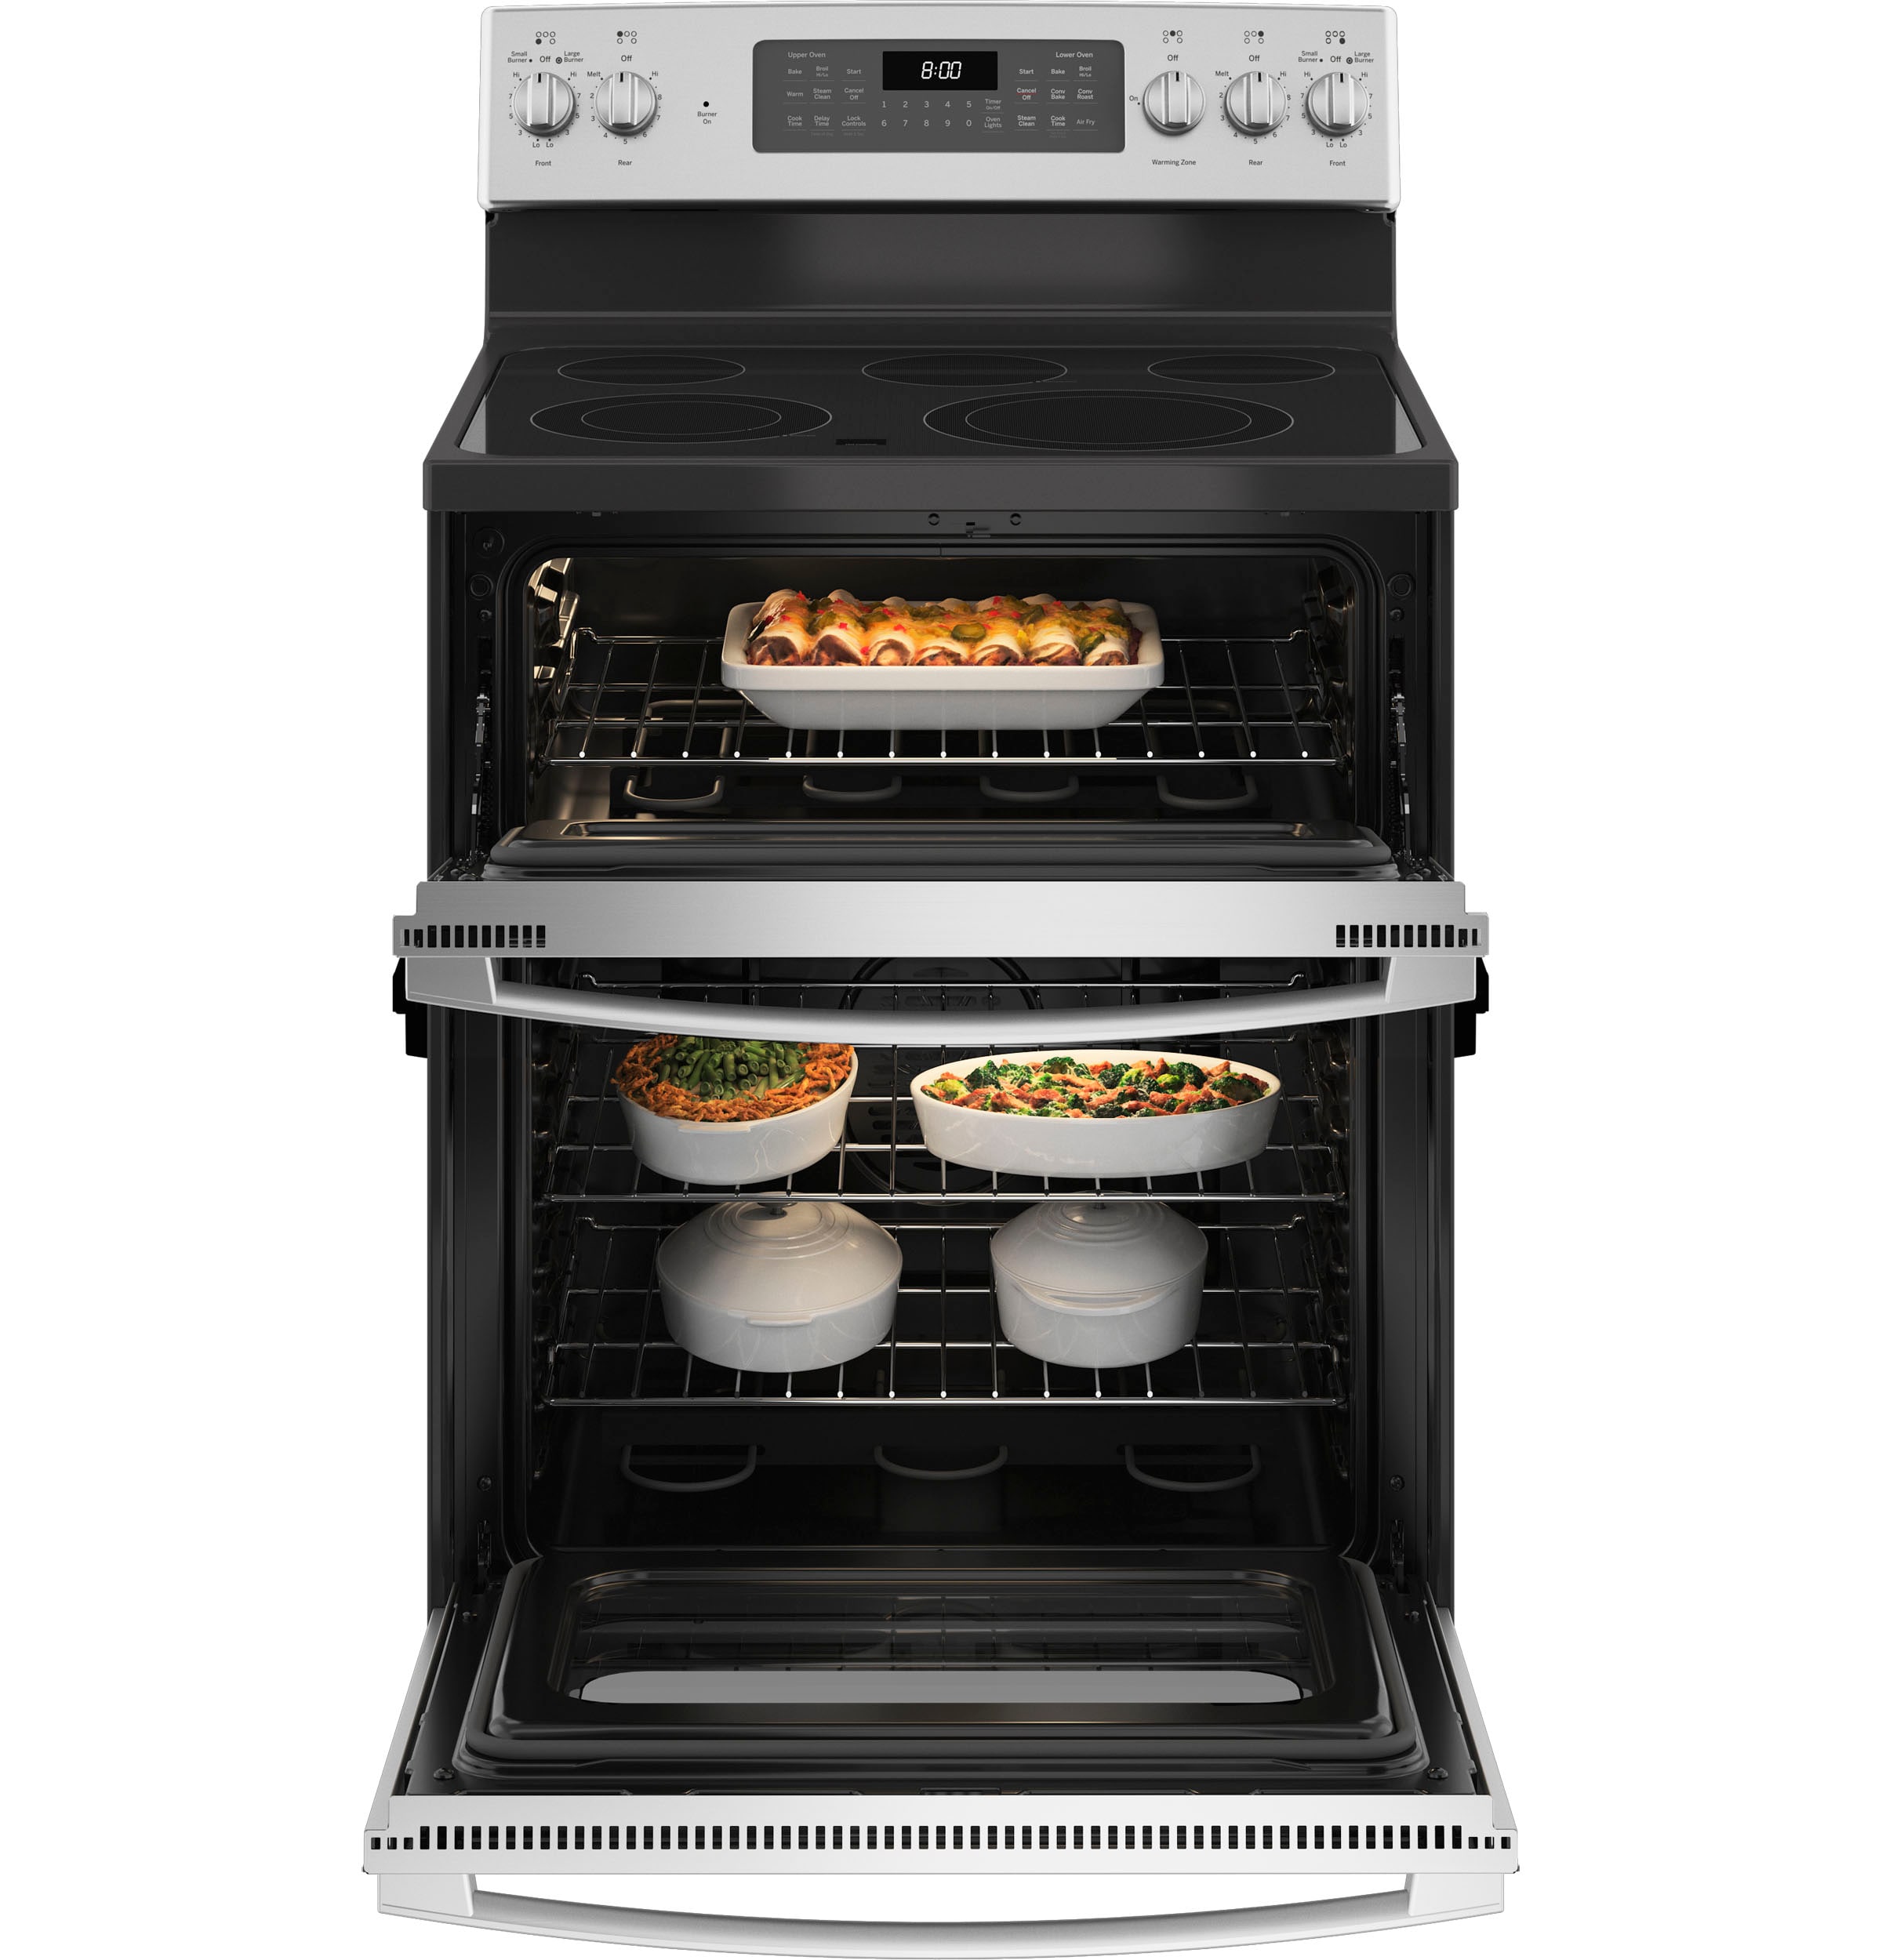 Freestanding Double Oven Electric Ranges at